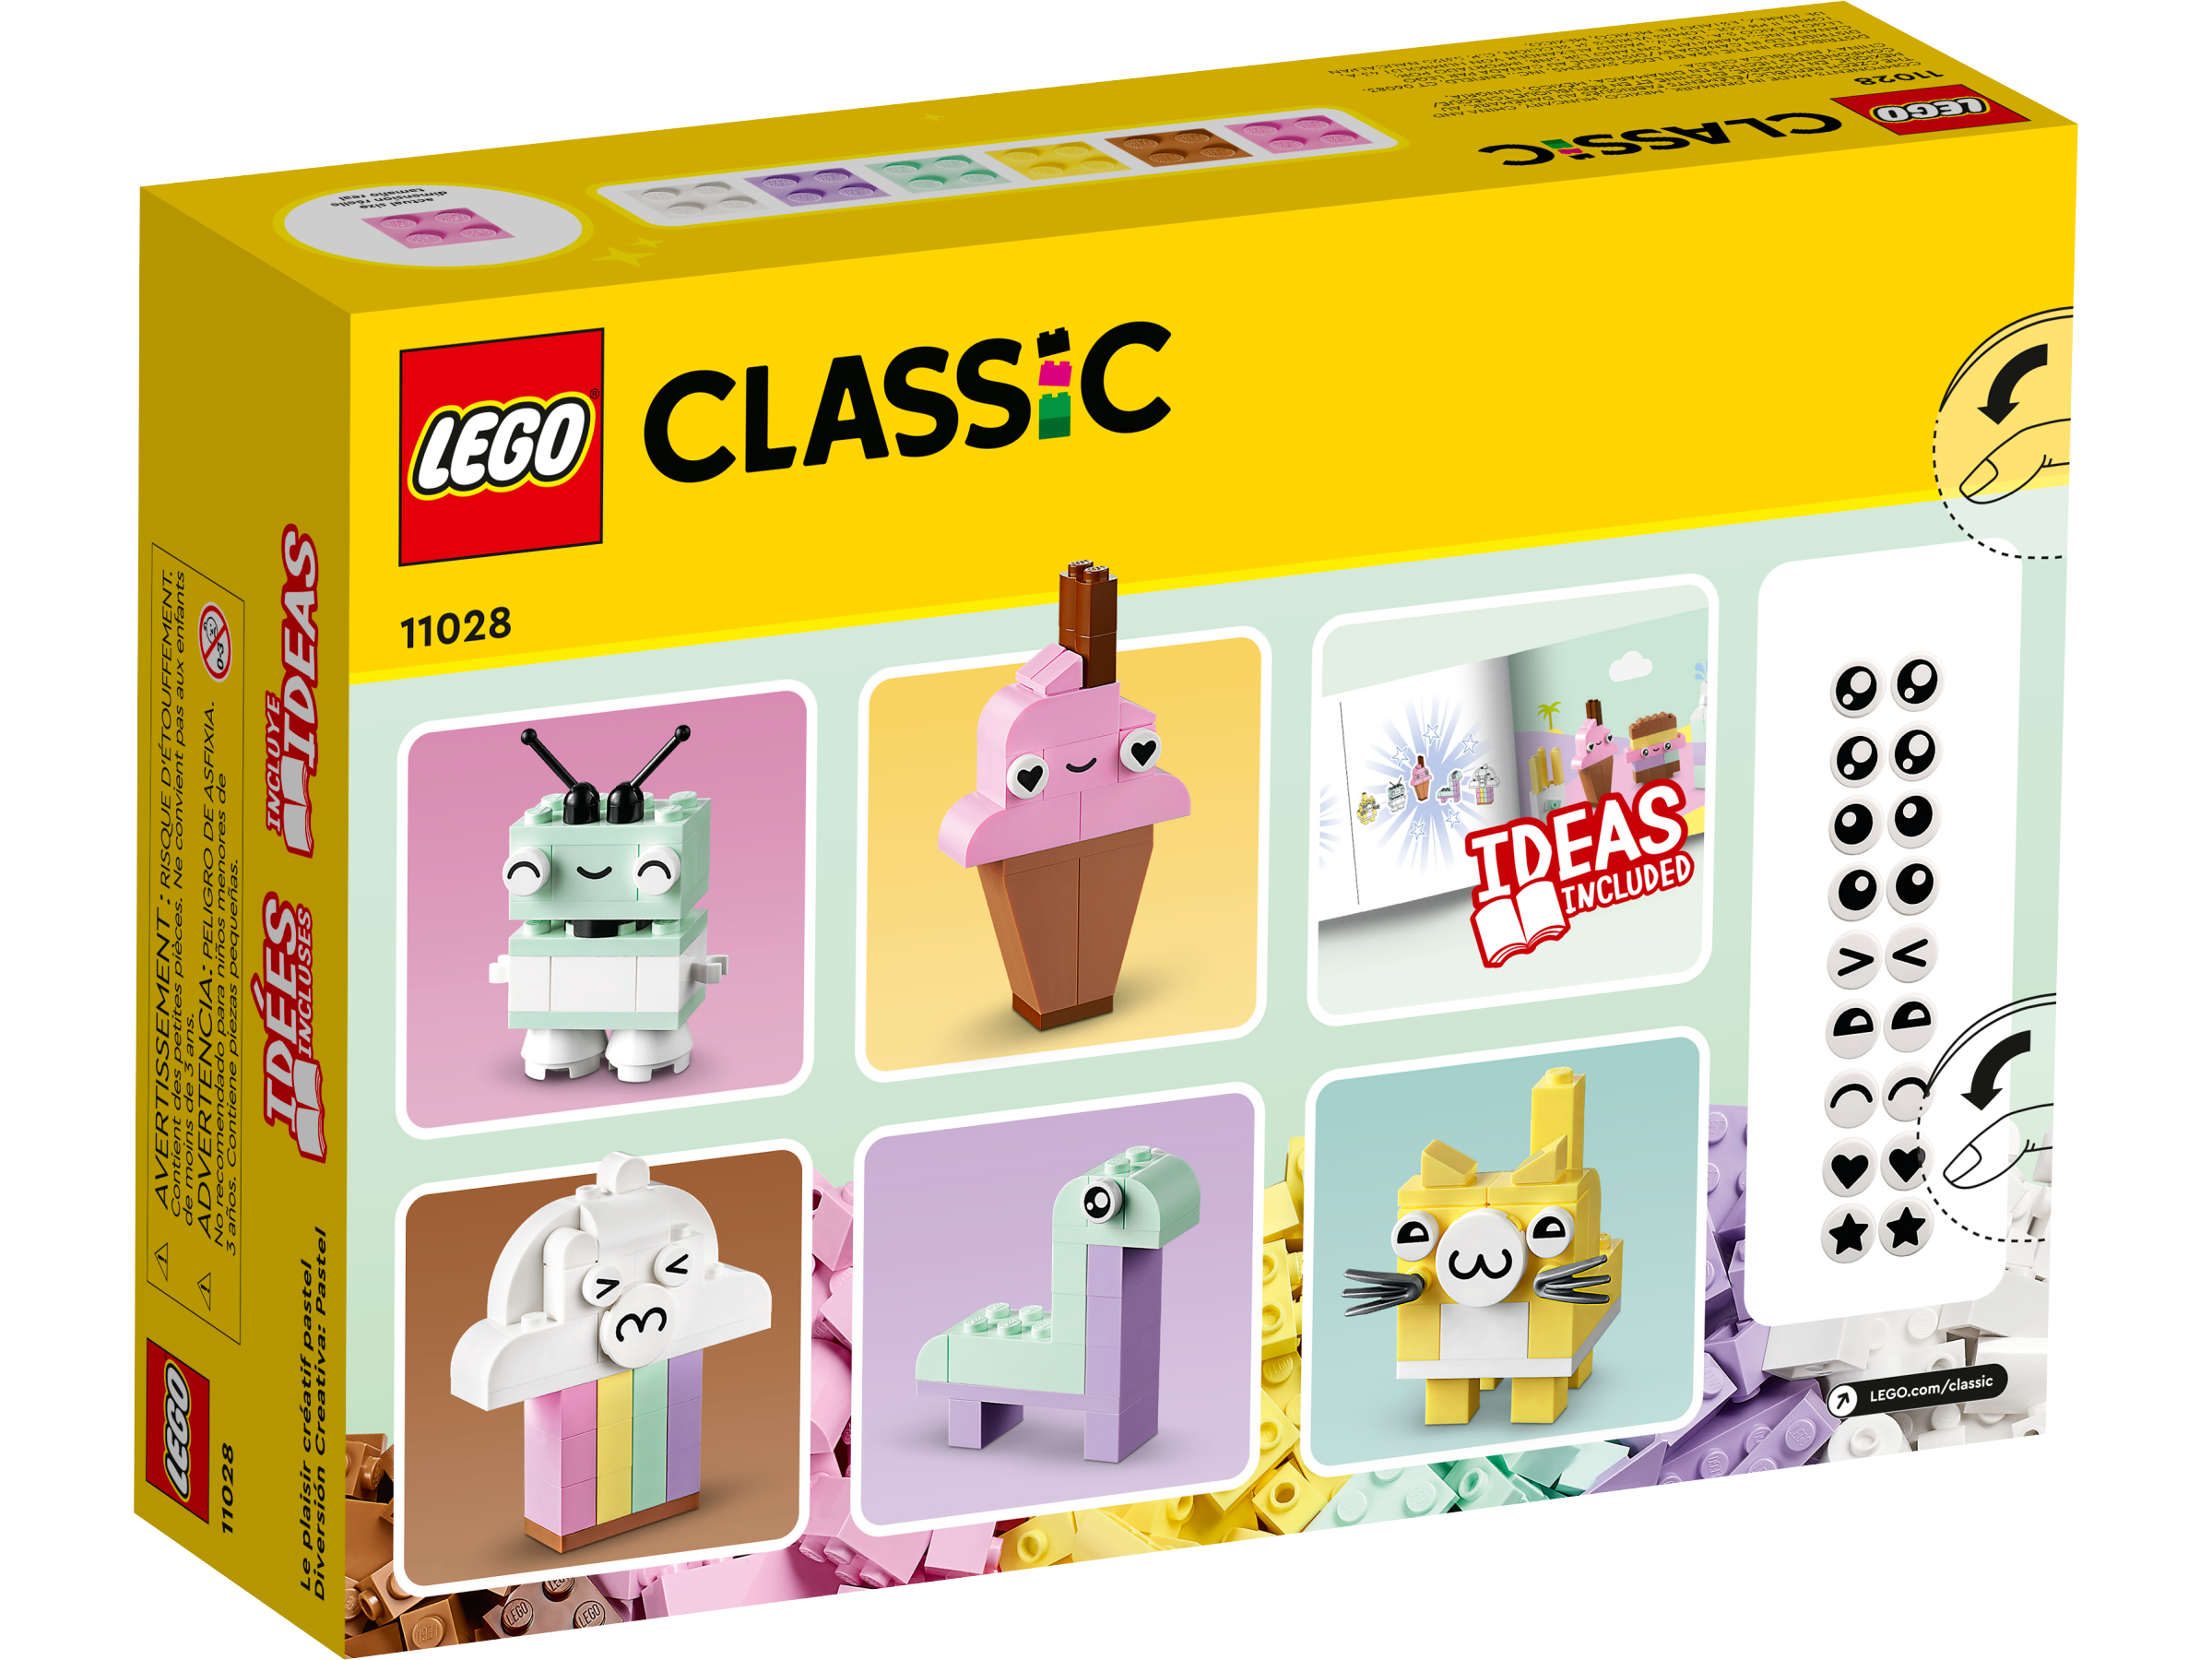 LEGO Classic Creative Pastel Fun Bricks Box 11028, Building Toys for Kids,  Girls, Boys ages 5 Plus with Models; Ice Cream, Dinosaur, Cat & More